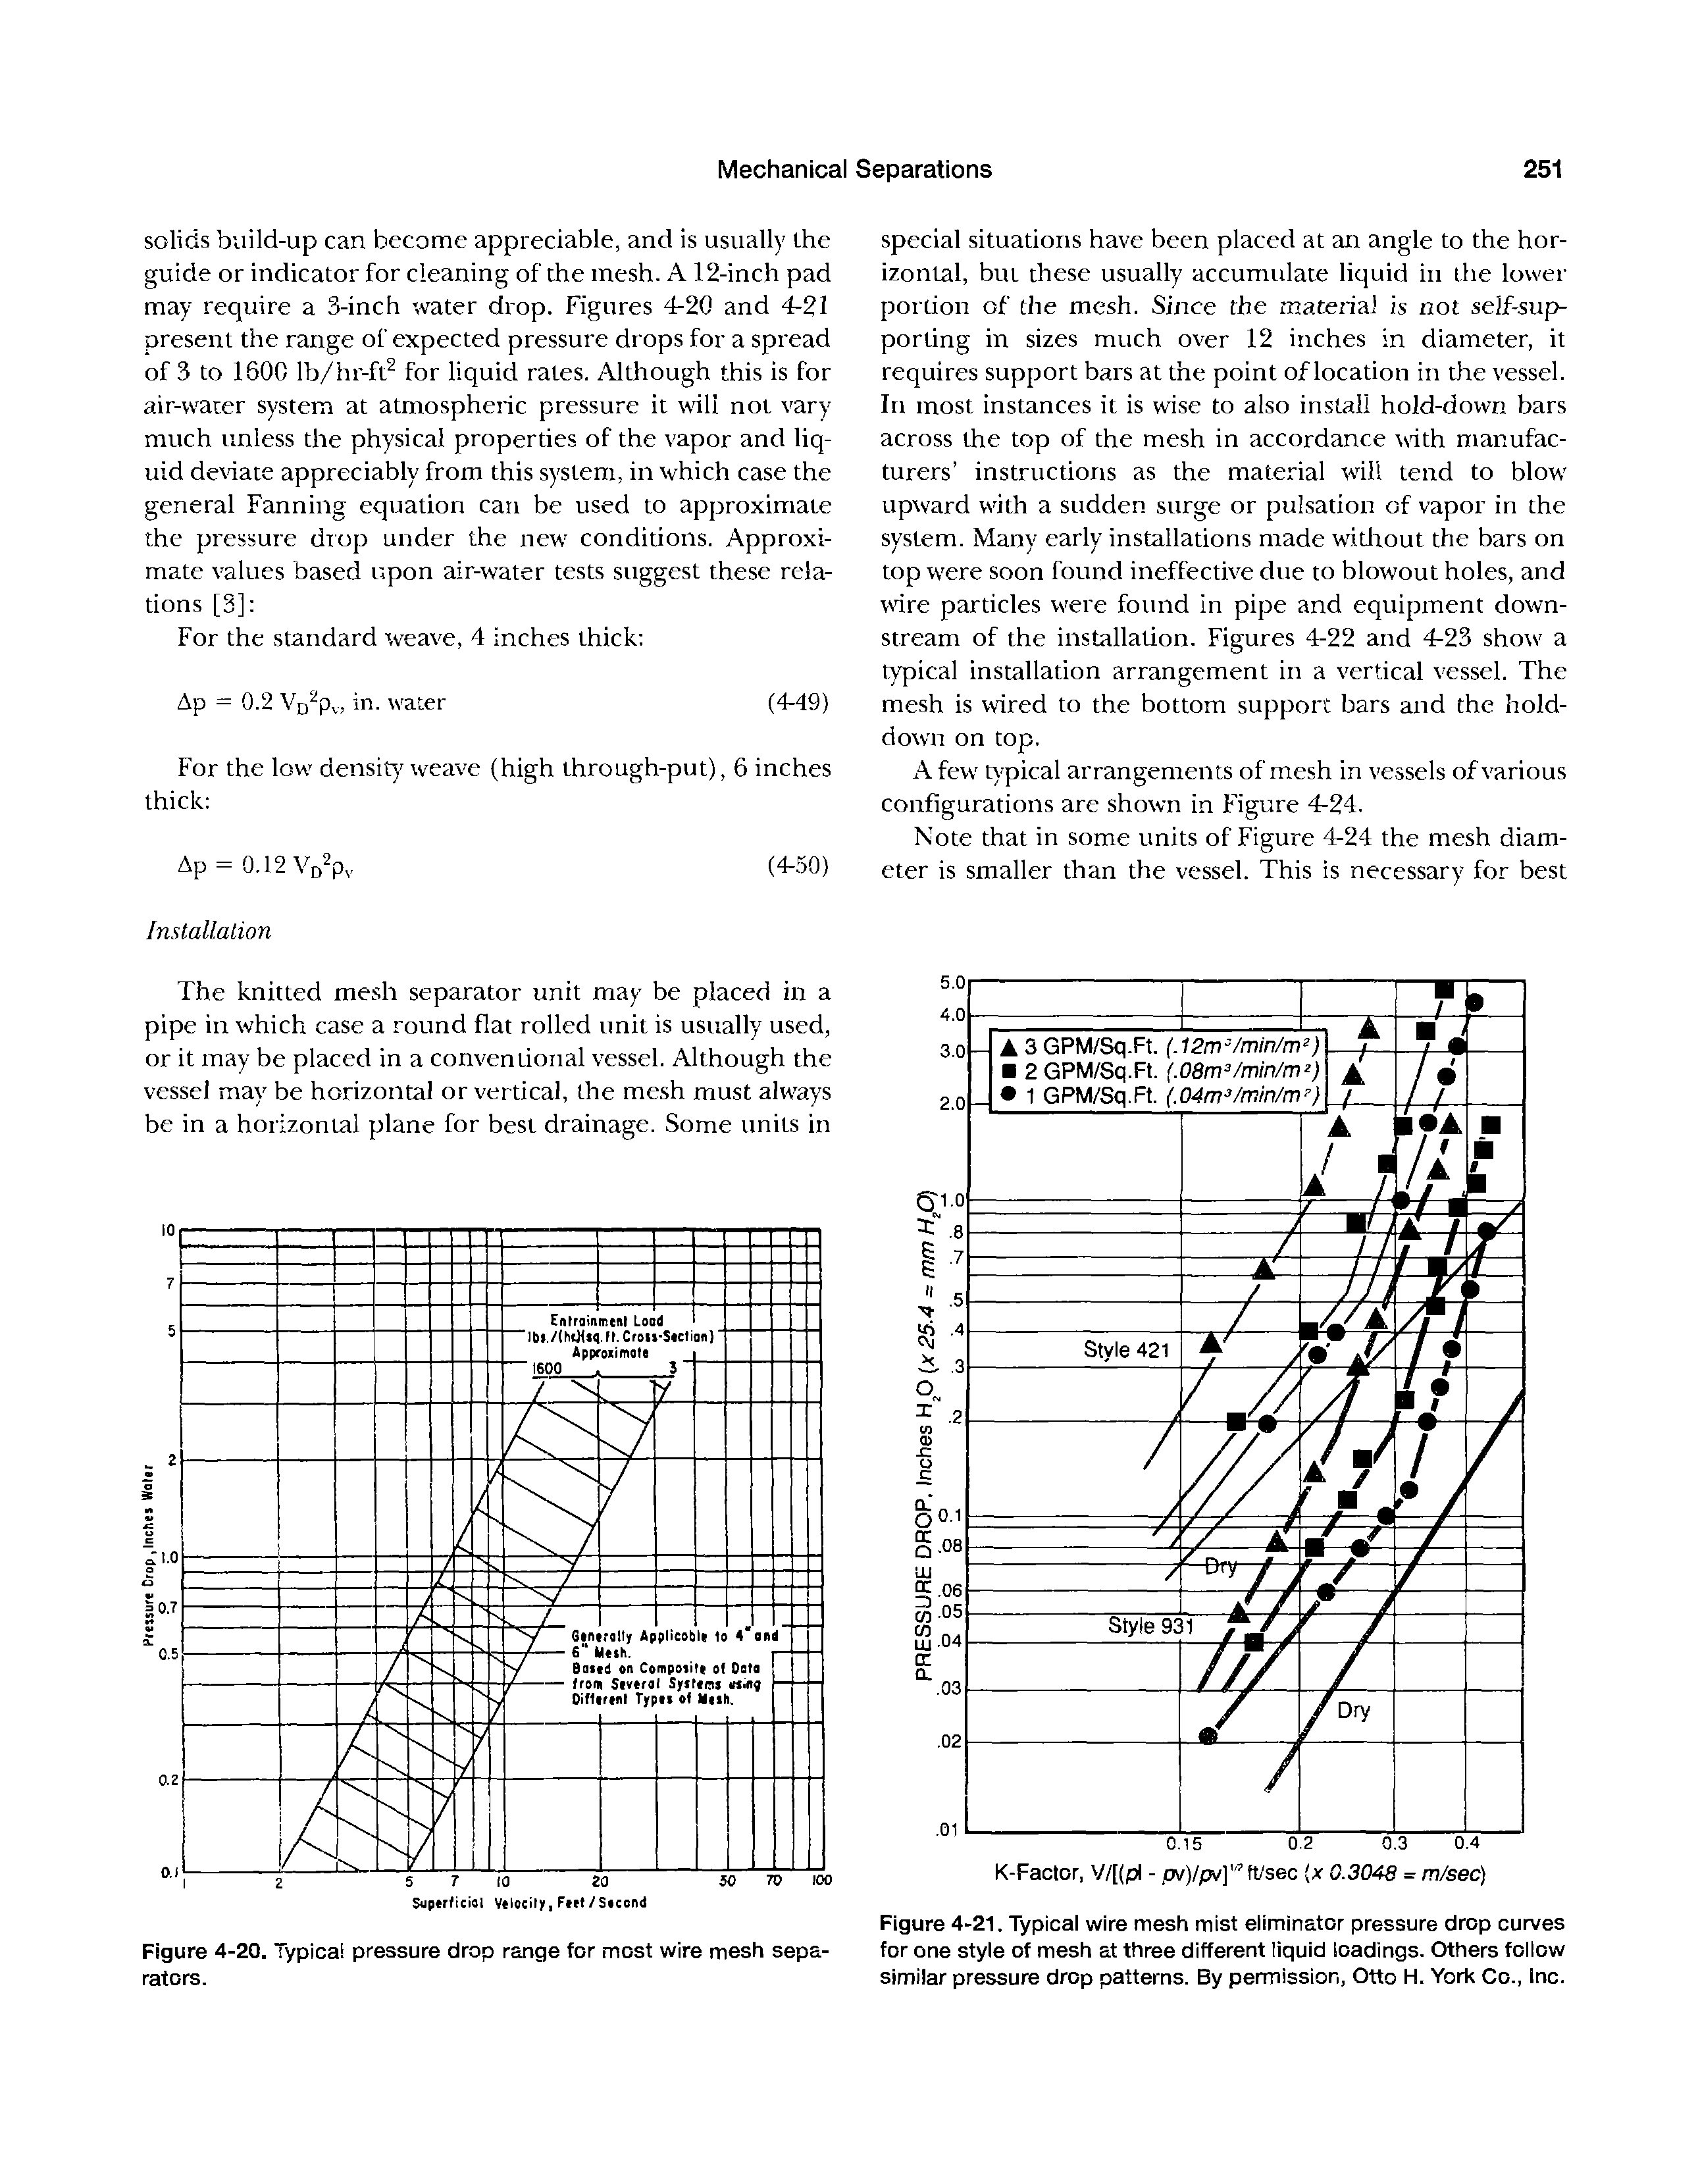 Figure 4-21. Typical wire mesh mist eliminator pressure drop curves for one style of mesh at three different liquid loadings. Others follow similar pressure drop patterns. By permission, Otto H. York Co., Inc.